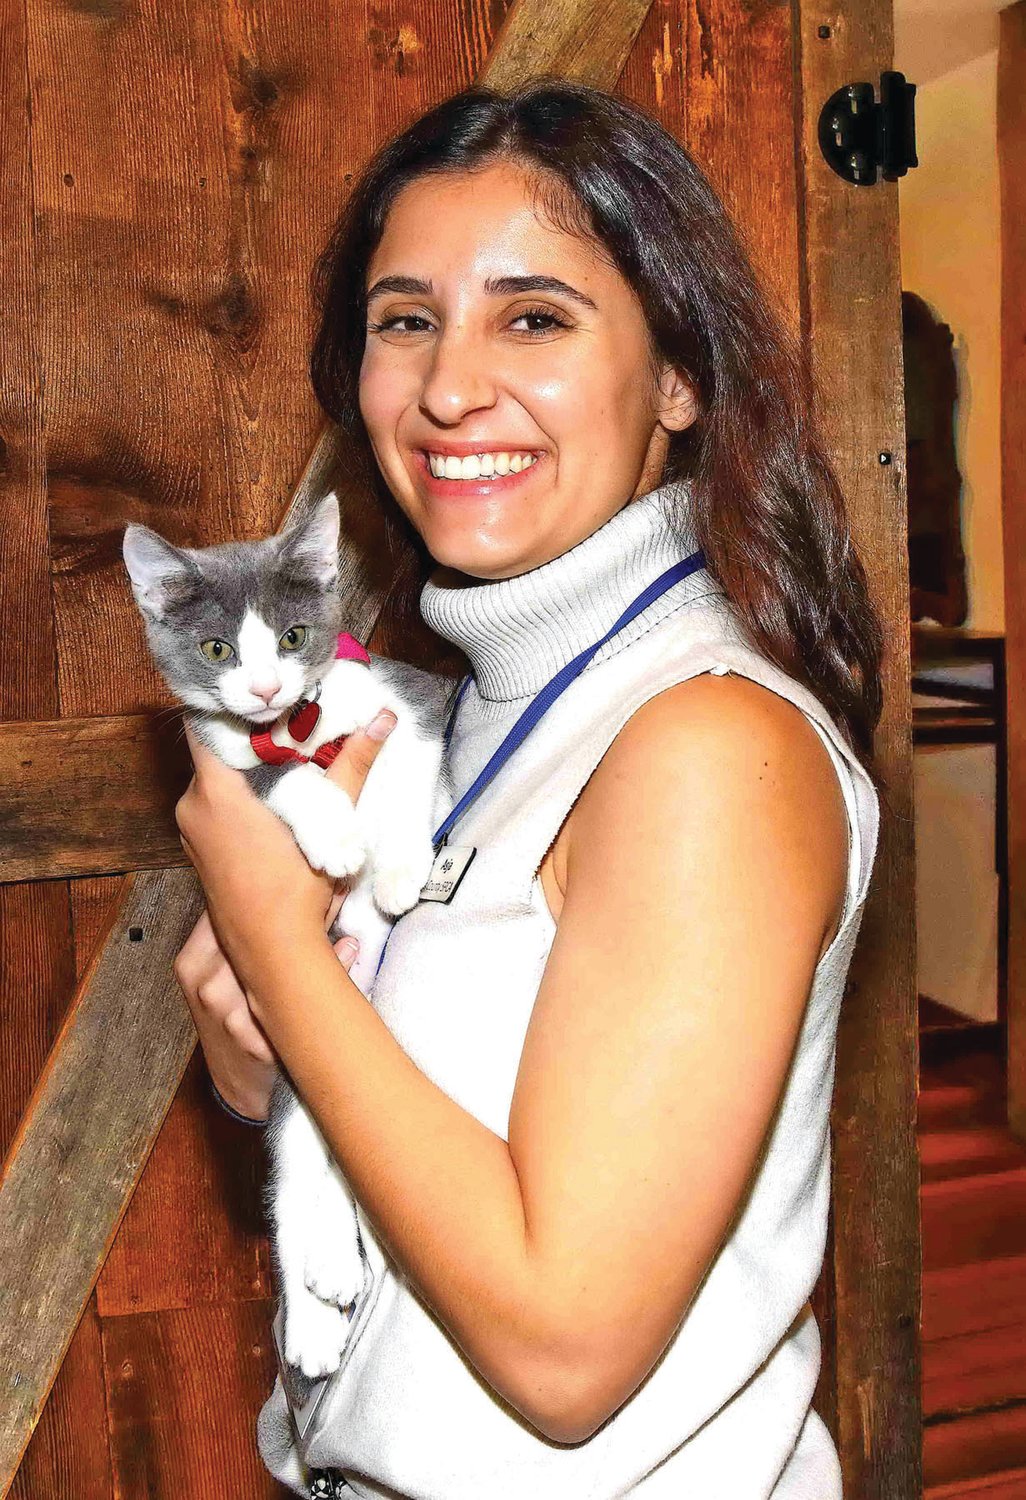 Asja Badalamenti holding Fiona, one of the adoptable kittens at the event.